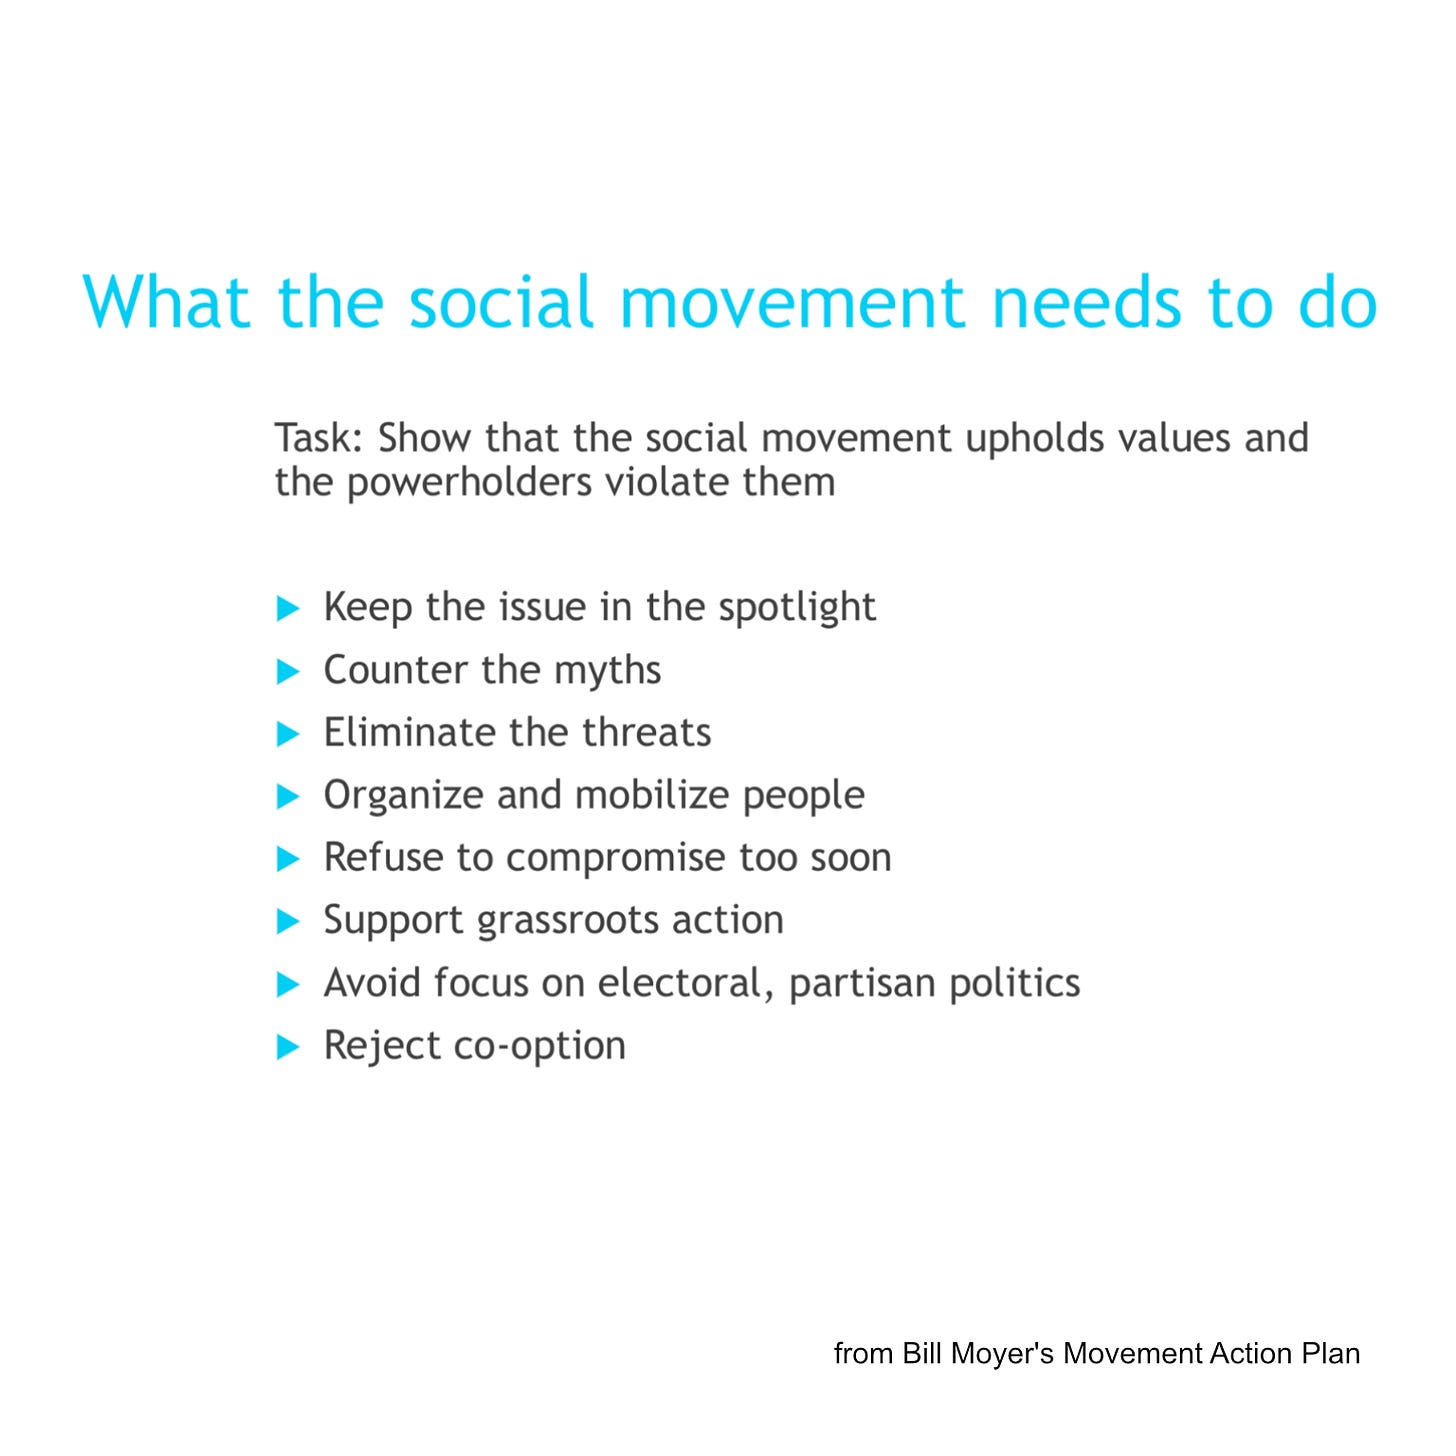 What the social movement needs to do. Task: Show that the social movement upholds values and the powerholders violate them. Keep the issue in the spotlight. Counter the myths. Eliminate the threats. Organize and mobilize people. Refuse to compromise too soon. Support grassroots action. Avoid focus on electoral, partisan politics. Reject co-option. from Bill Moyer’s Movement Action Plan.